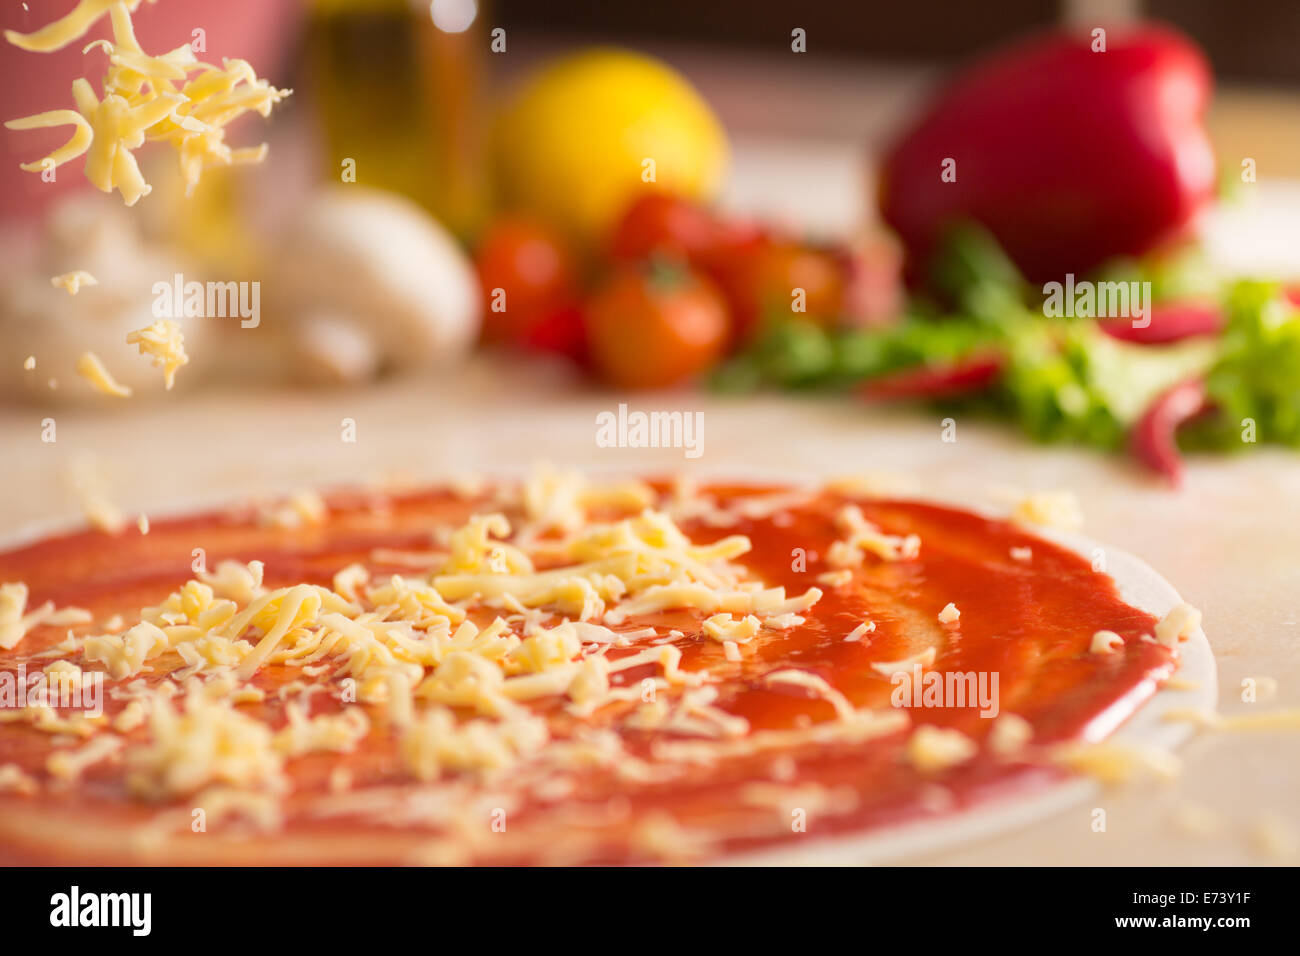 Italian pizza preparation with cheese falling. Stock Photo